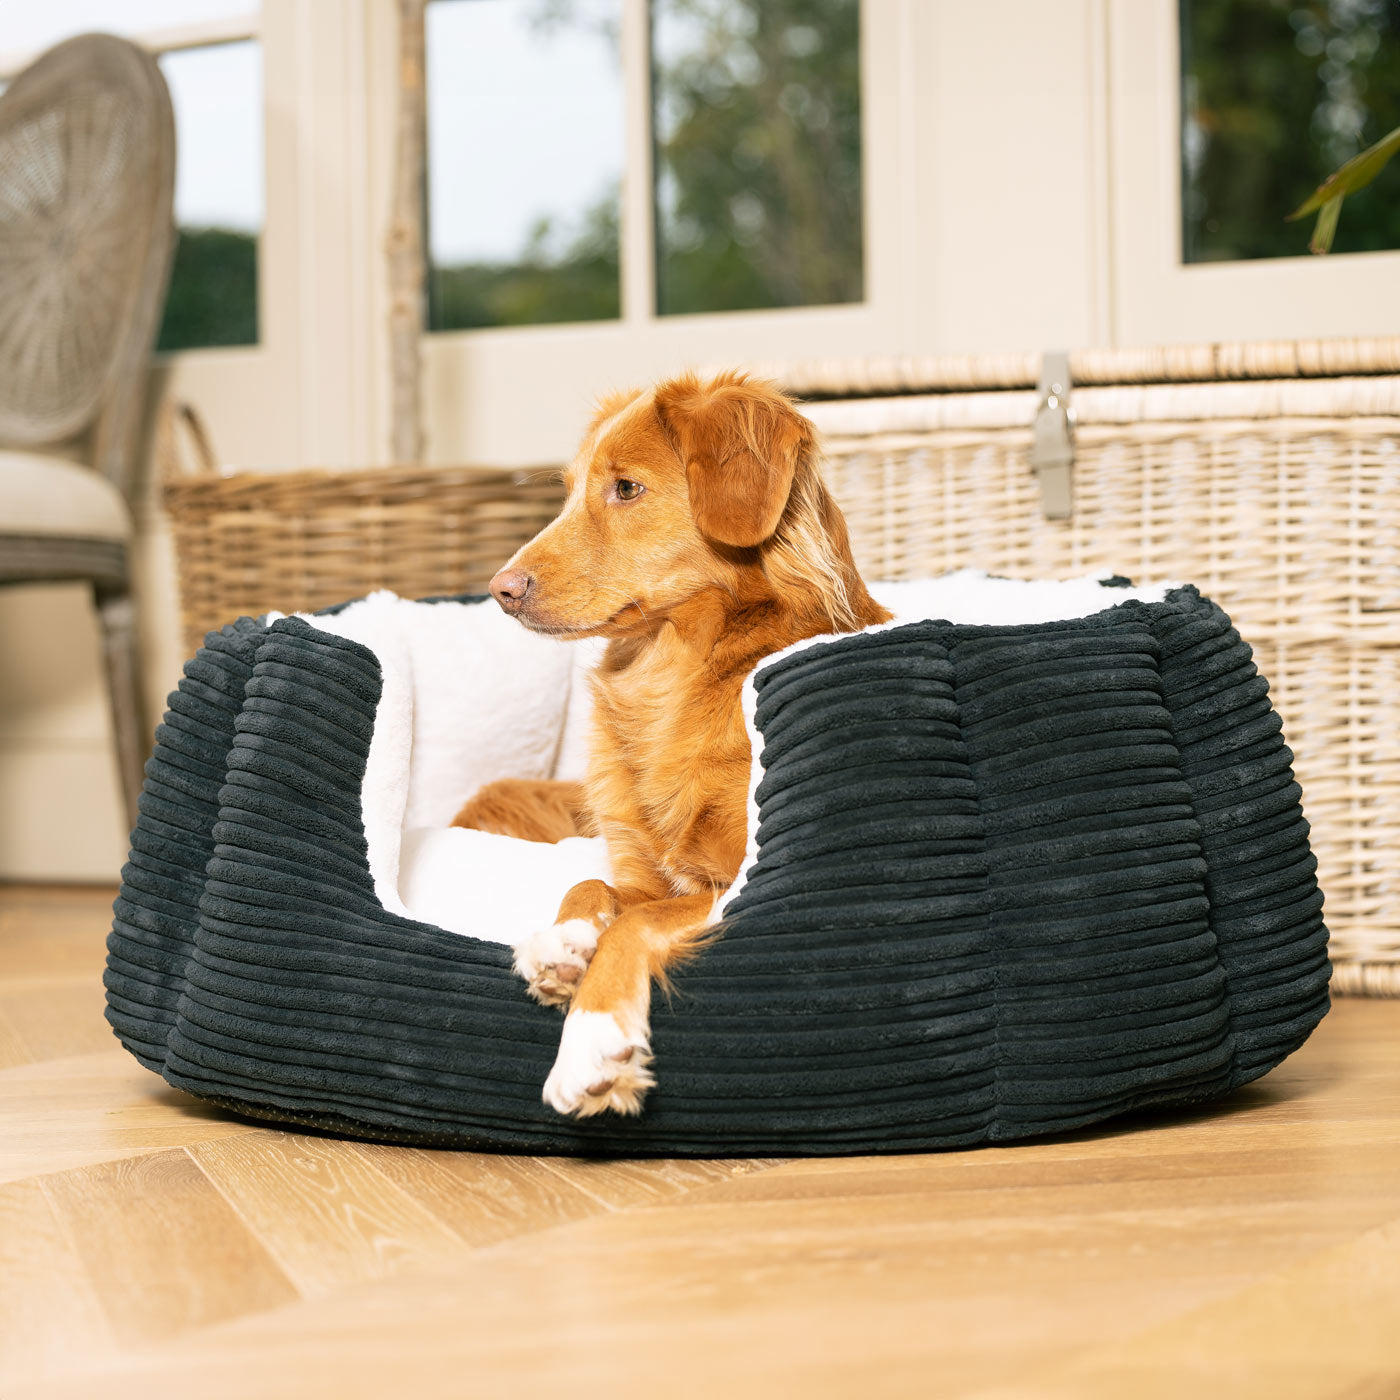 Discover Our Luxurious High Wall Bed For Dogs, Featuring inner pillow with plush teddy fleece on one side To Craft The Perfect Cat Bed In Stunning Essentials Navy Plush! Available To Personalise Now at Lords & Labradors    